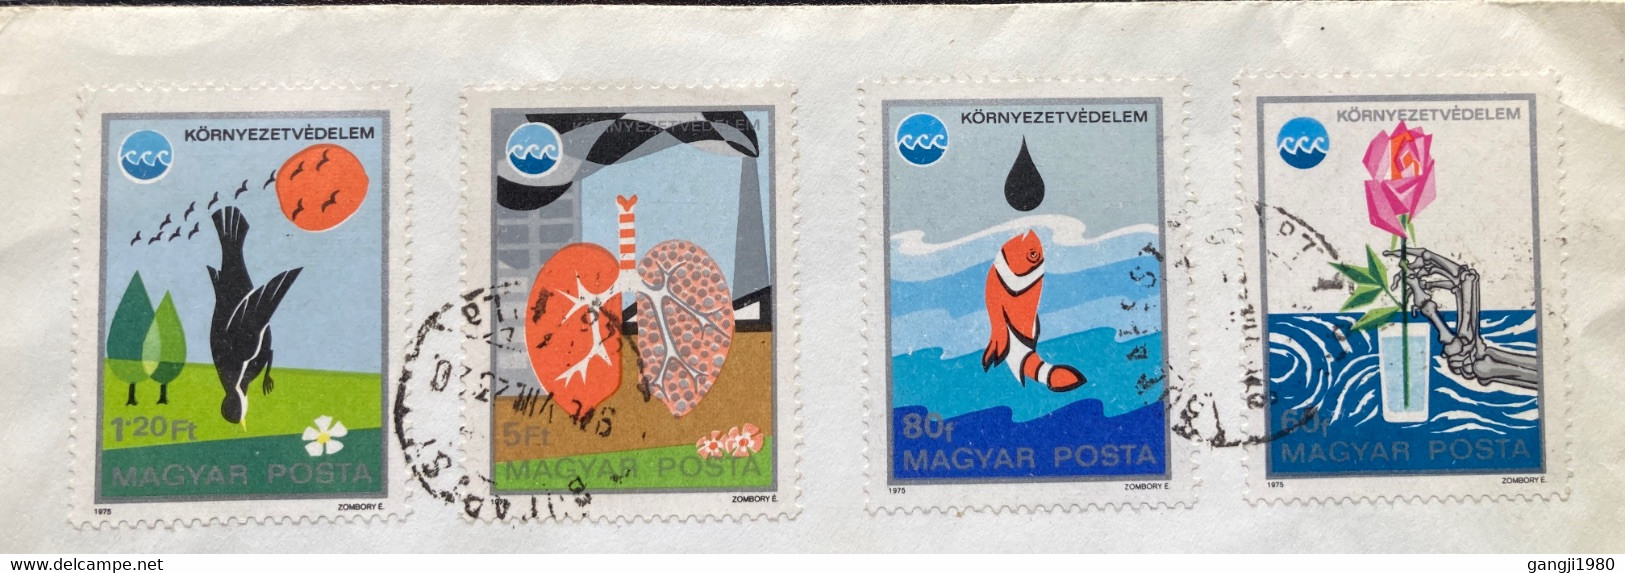 HUNGARY 1975, POLLUTION OF WATER,RIVER,ART,SMOKE ,HEALTH 4 STAMPS,COVER TO ENGLAND - Storia Postale